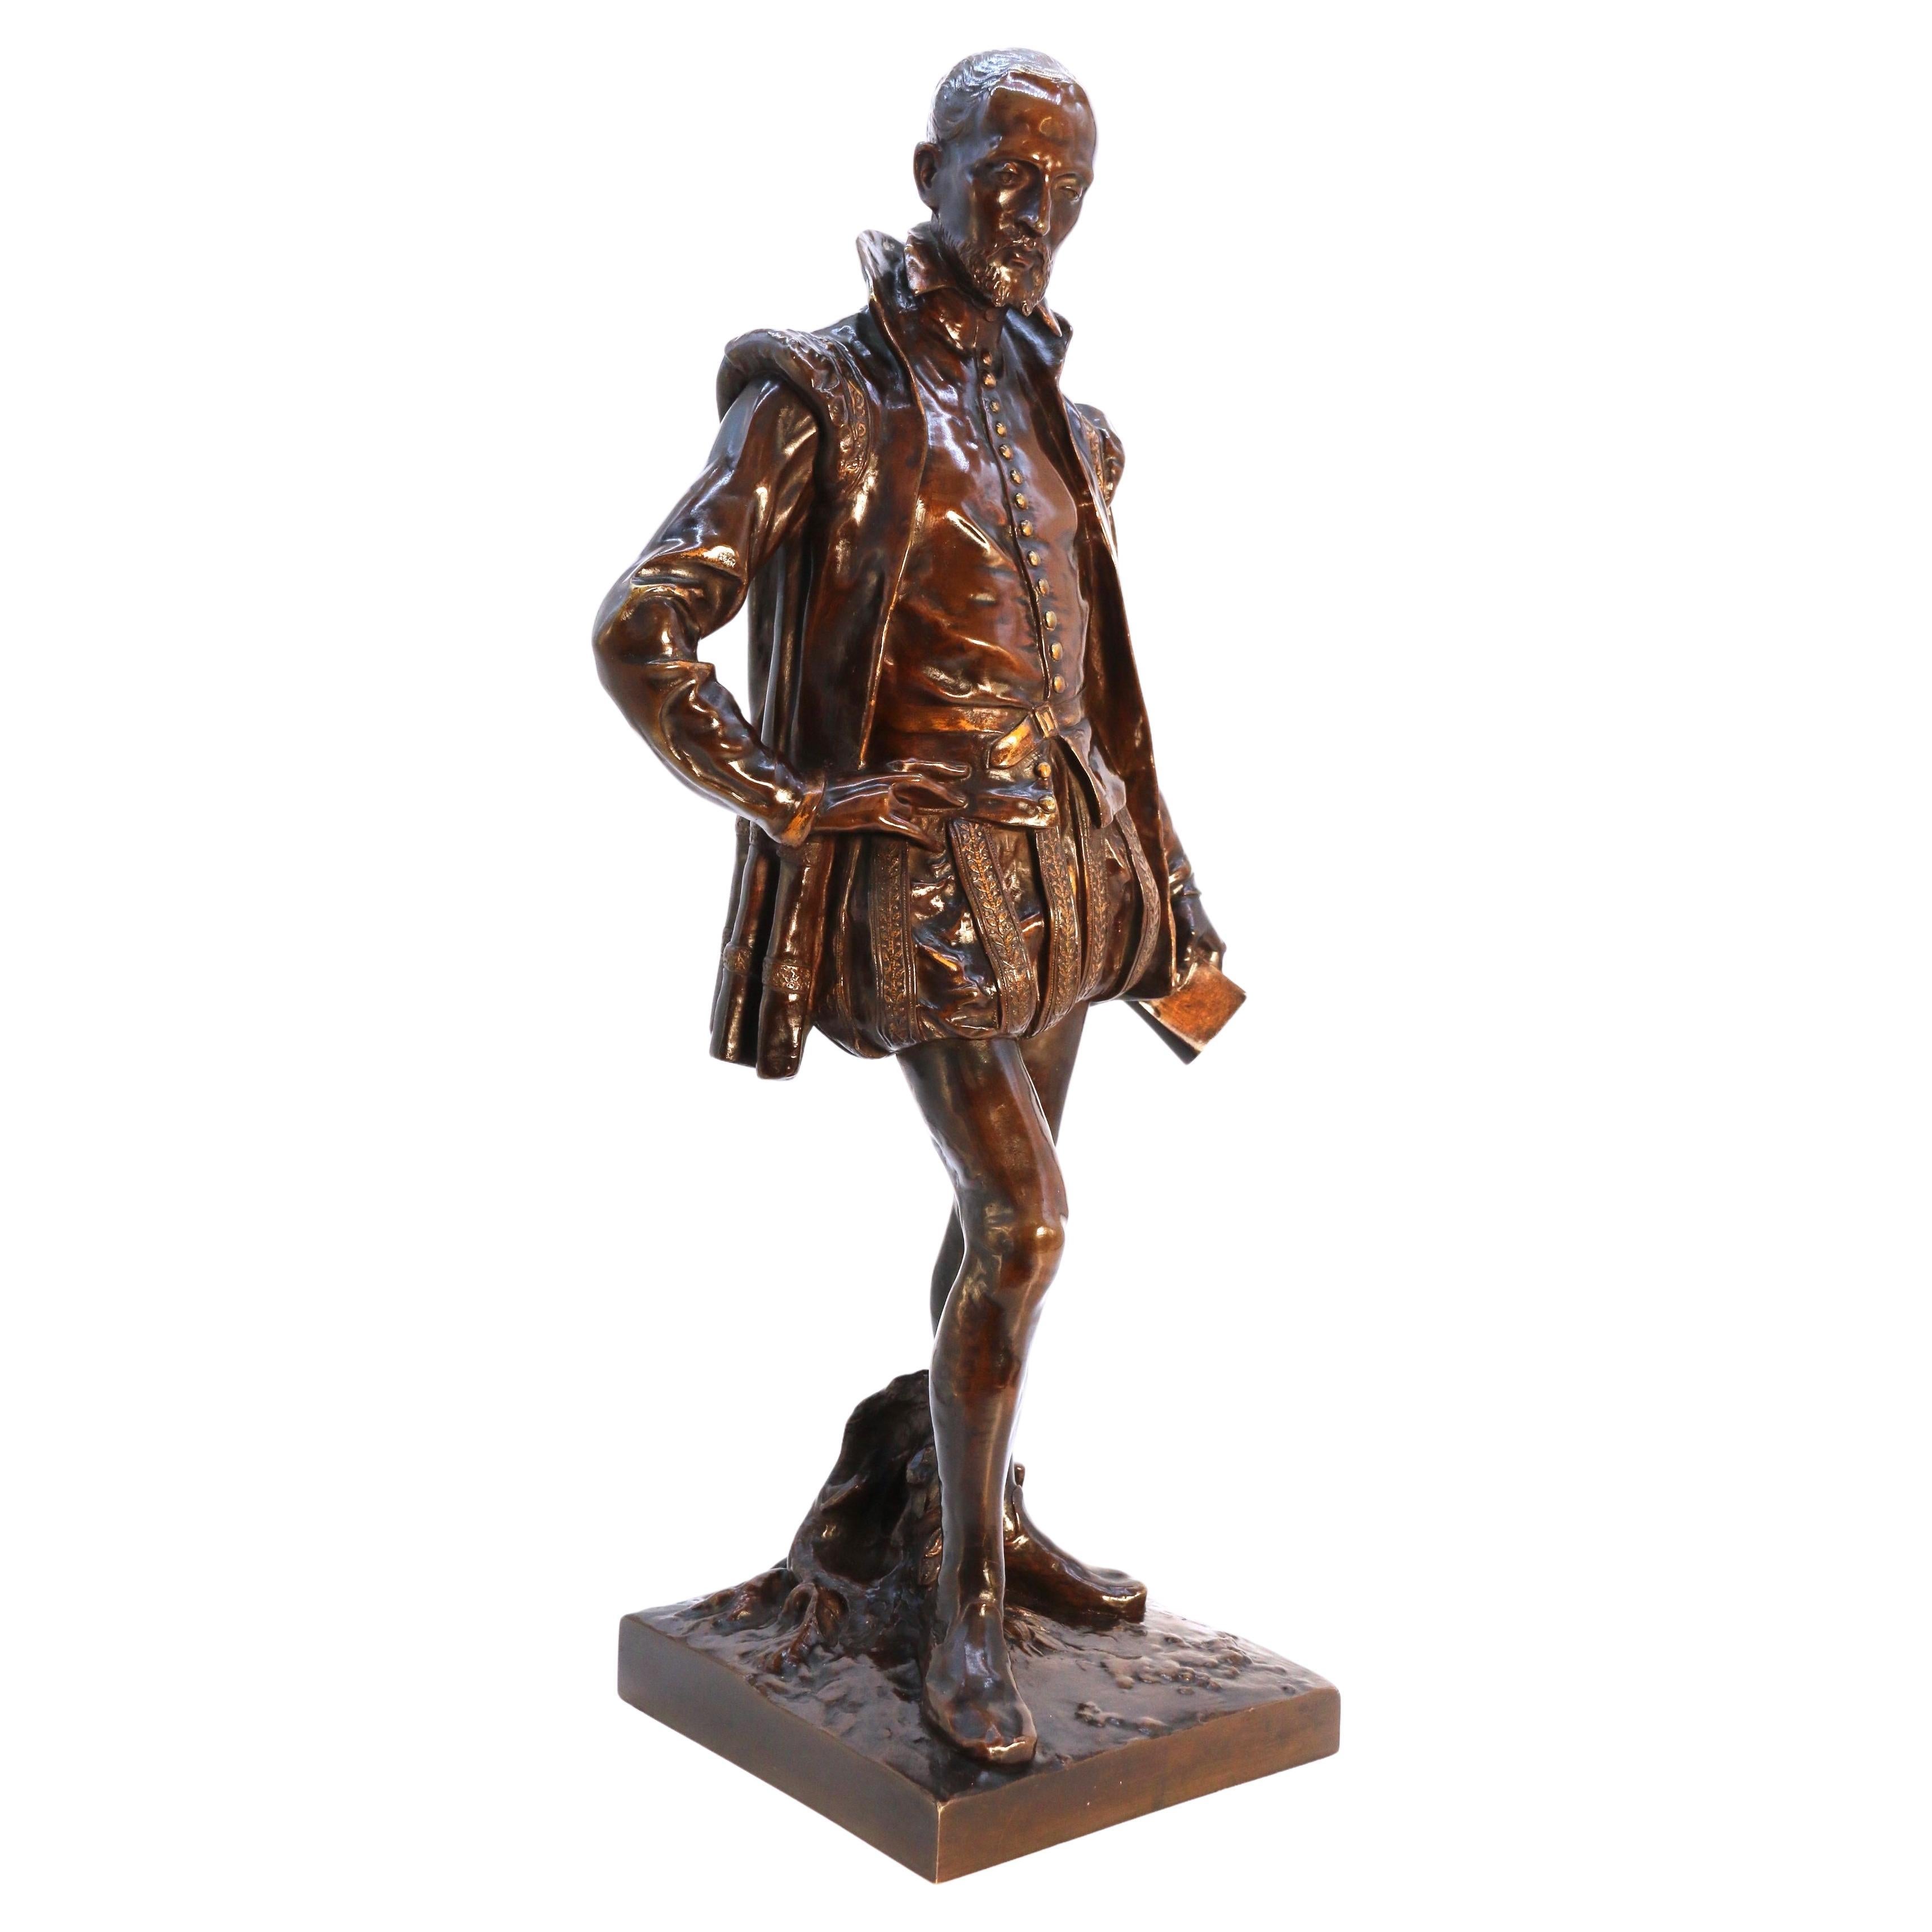 The 19th century bronze study of the French poet Joachim de Bellay by L Adolphe en vente